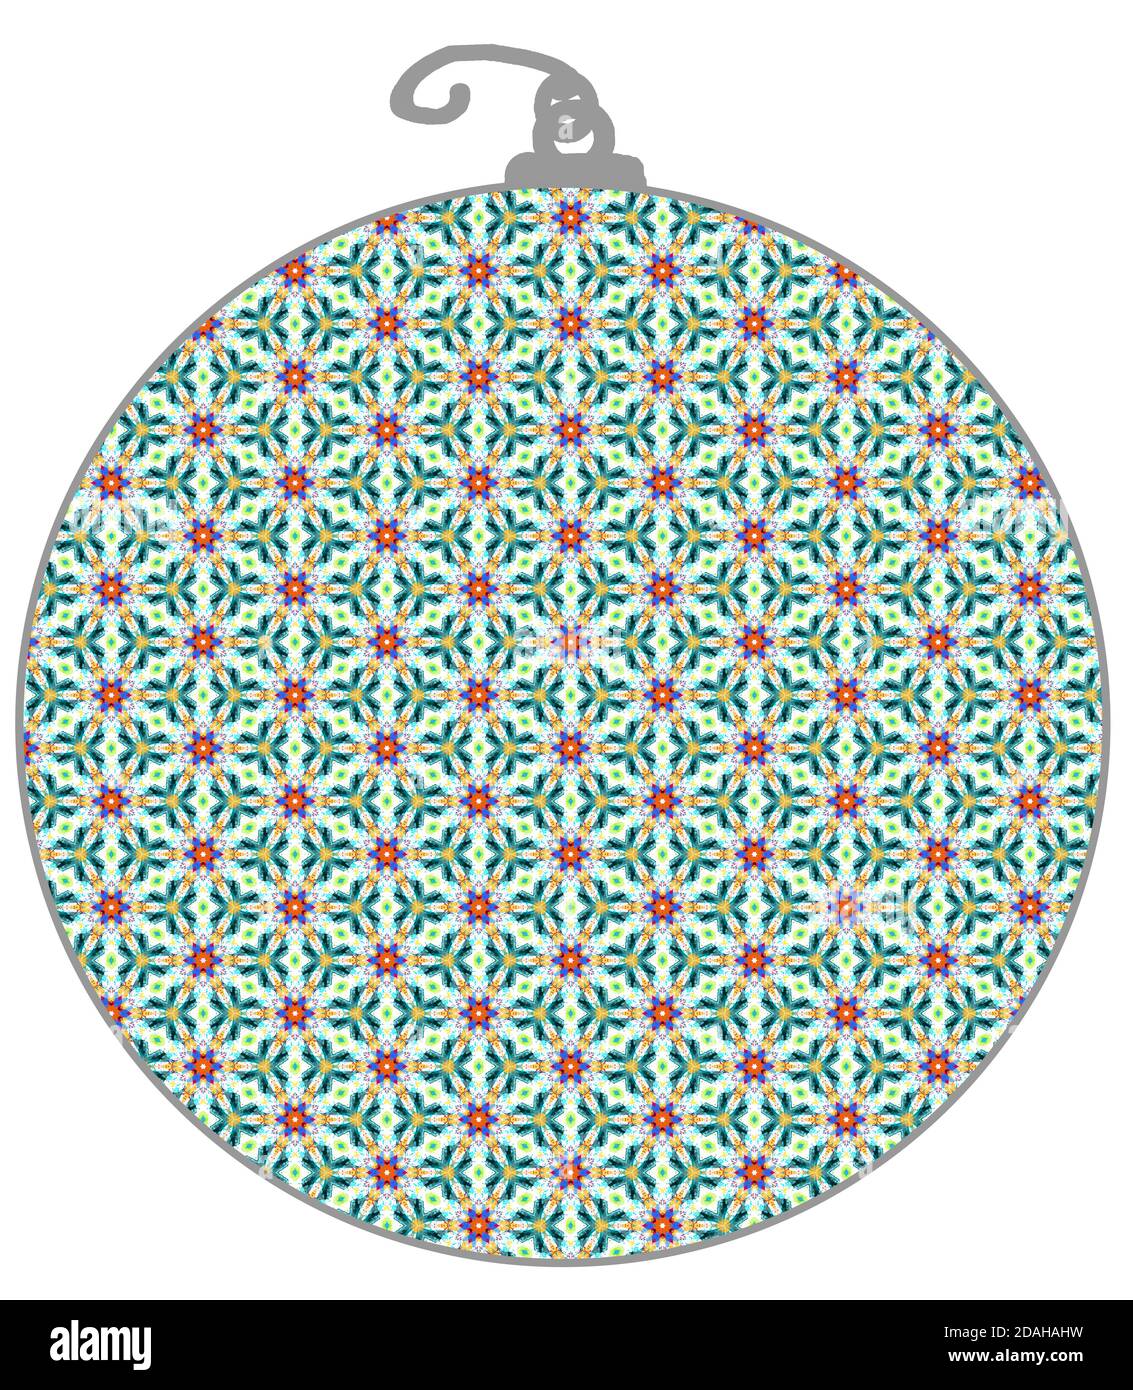 Black and white Christmas decoration op art ornament illustration. Stock Photo